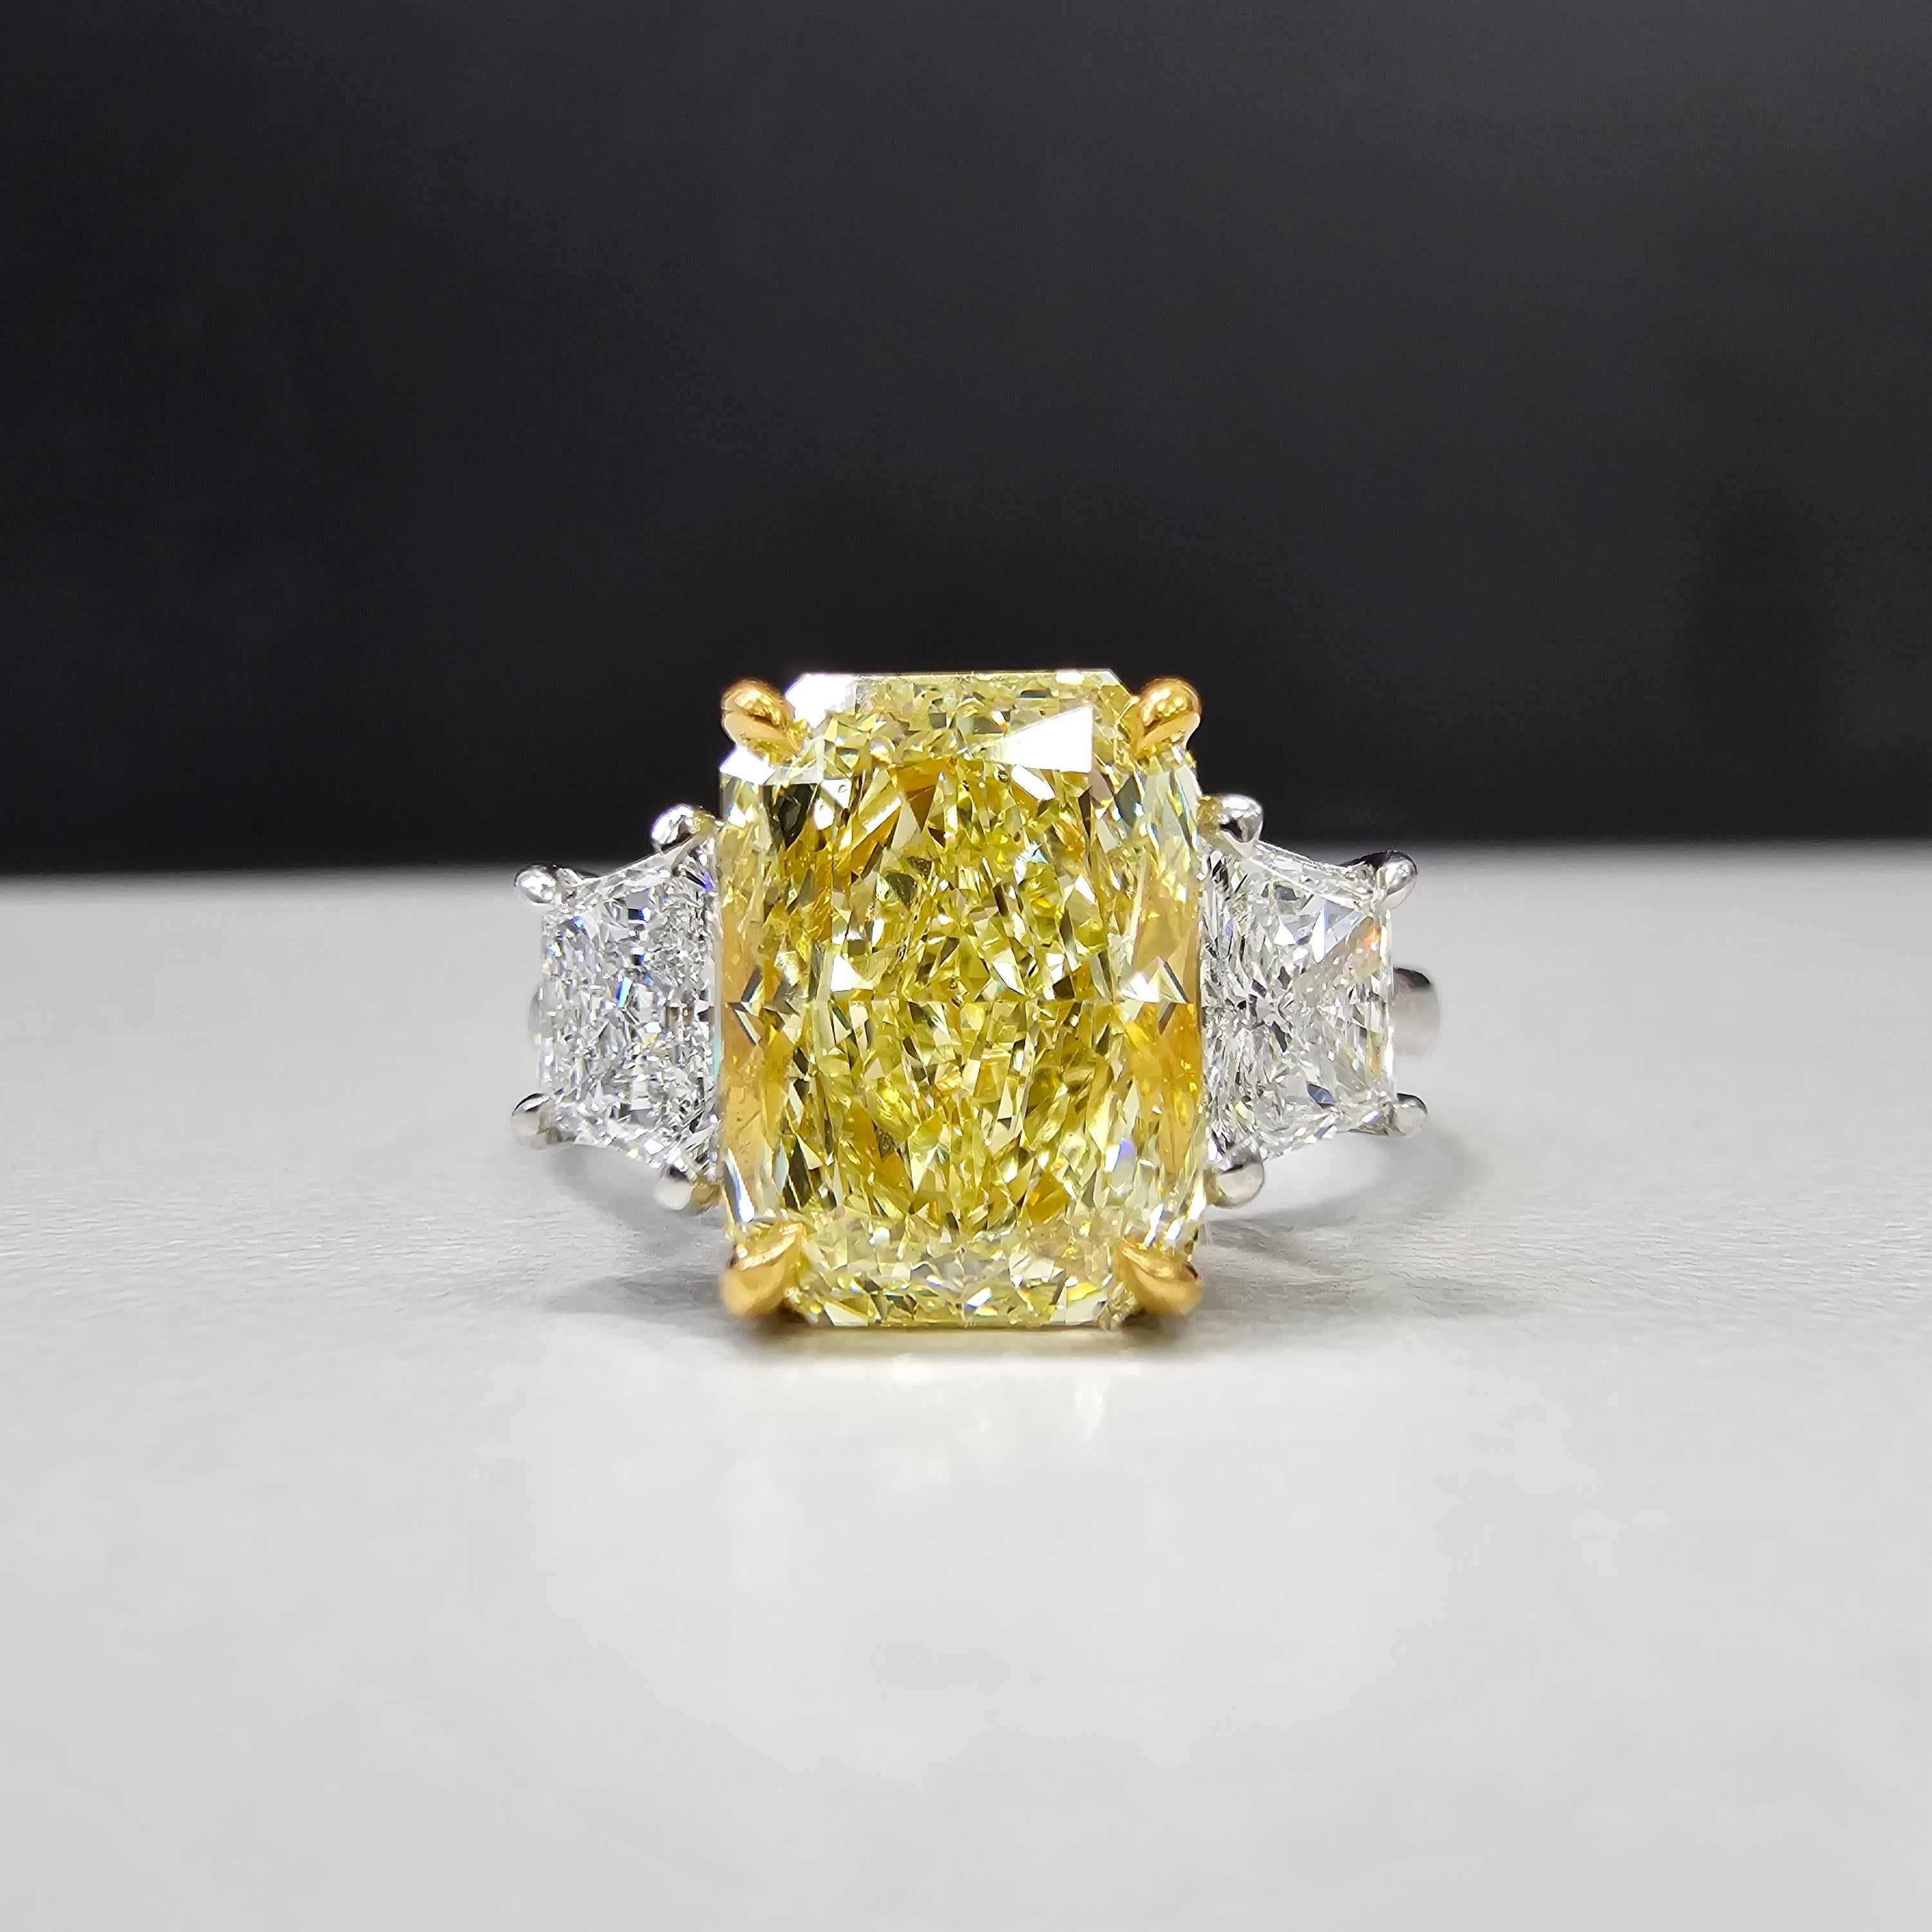 Absolutely sensational 3ct Fancy Yellow radiant- full of life and fire, strong lemon yellow color
Incredible rectangular make, gorgeous ratio
100% eye clean, amazing SI1
Set in Platinum and 18kt Yellow Gold with 0.55ct D VS Trapezoids- top